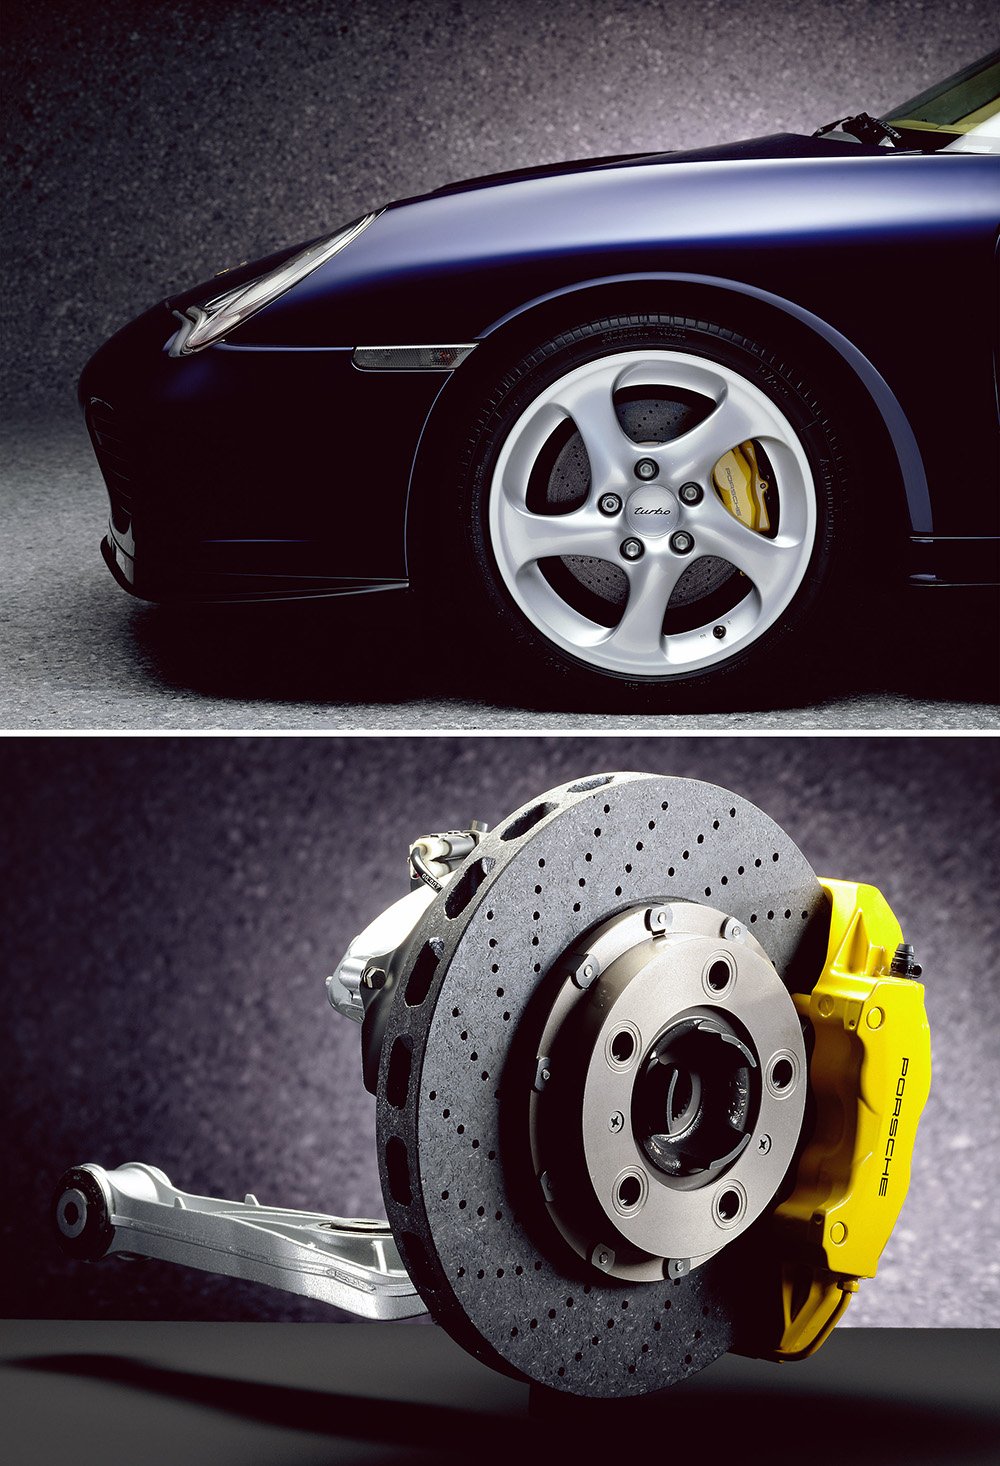 Porsche Ceramic Composite Brakes were introduced in 2000, for the 996 Turbo